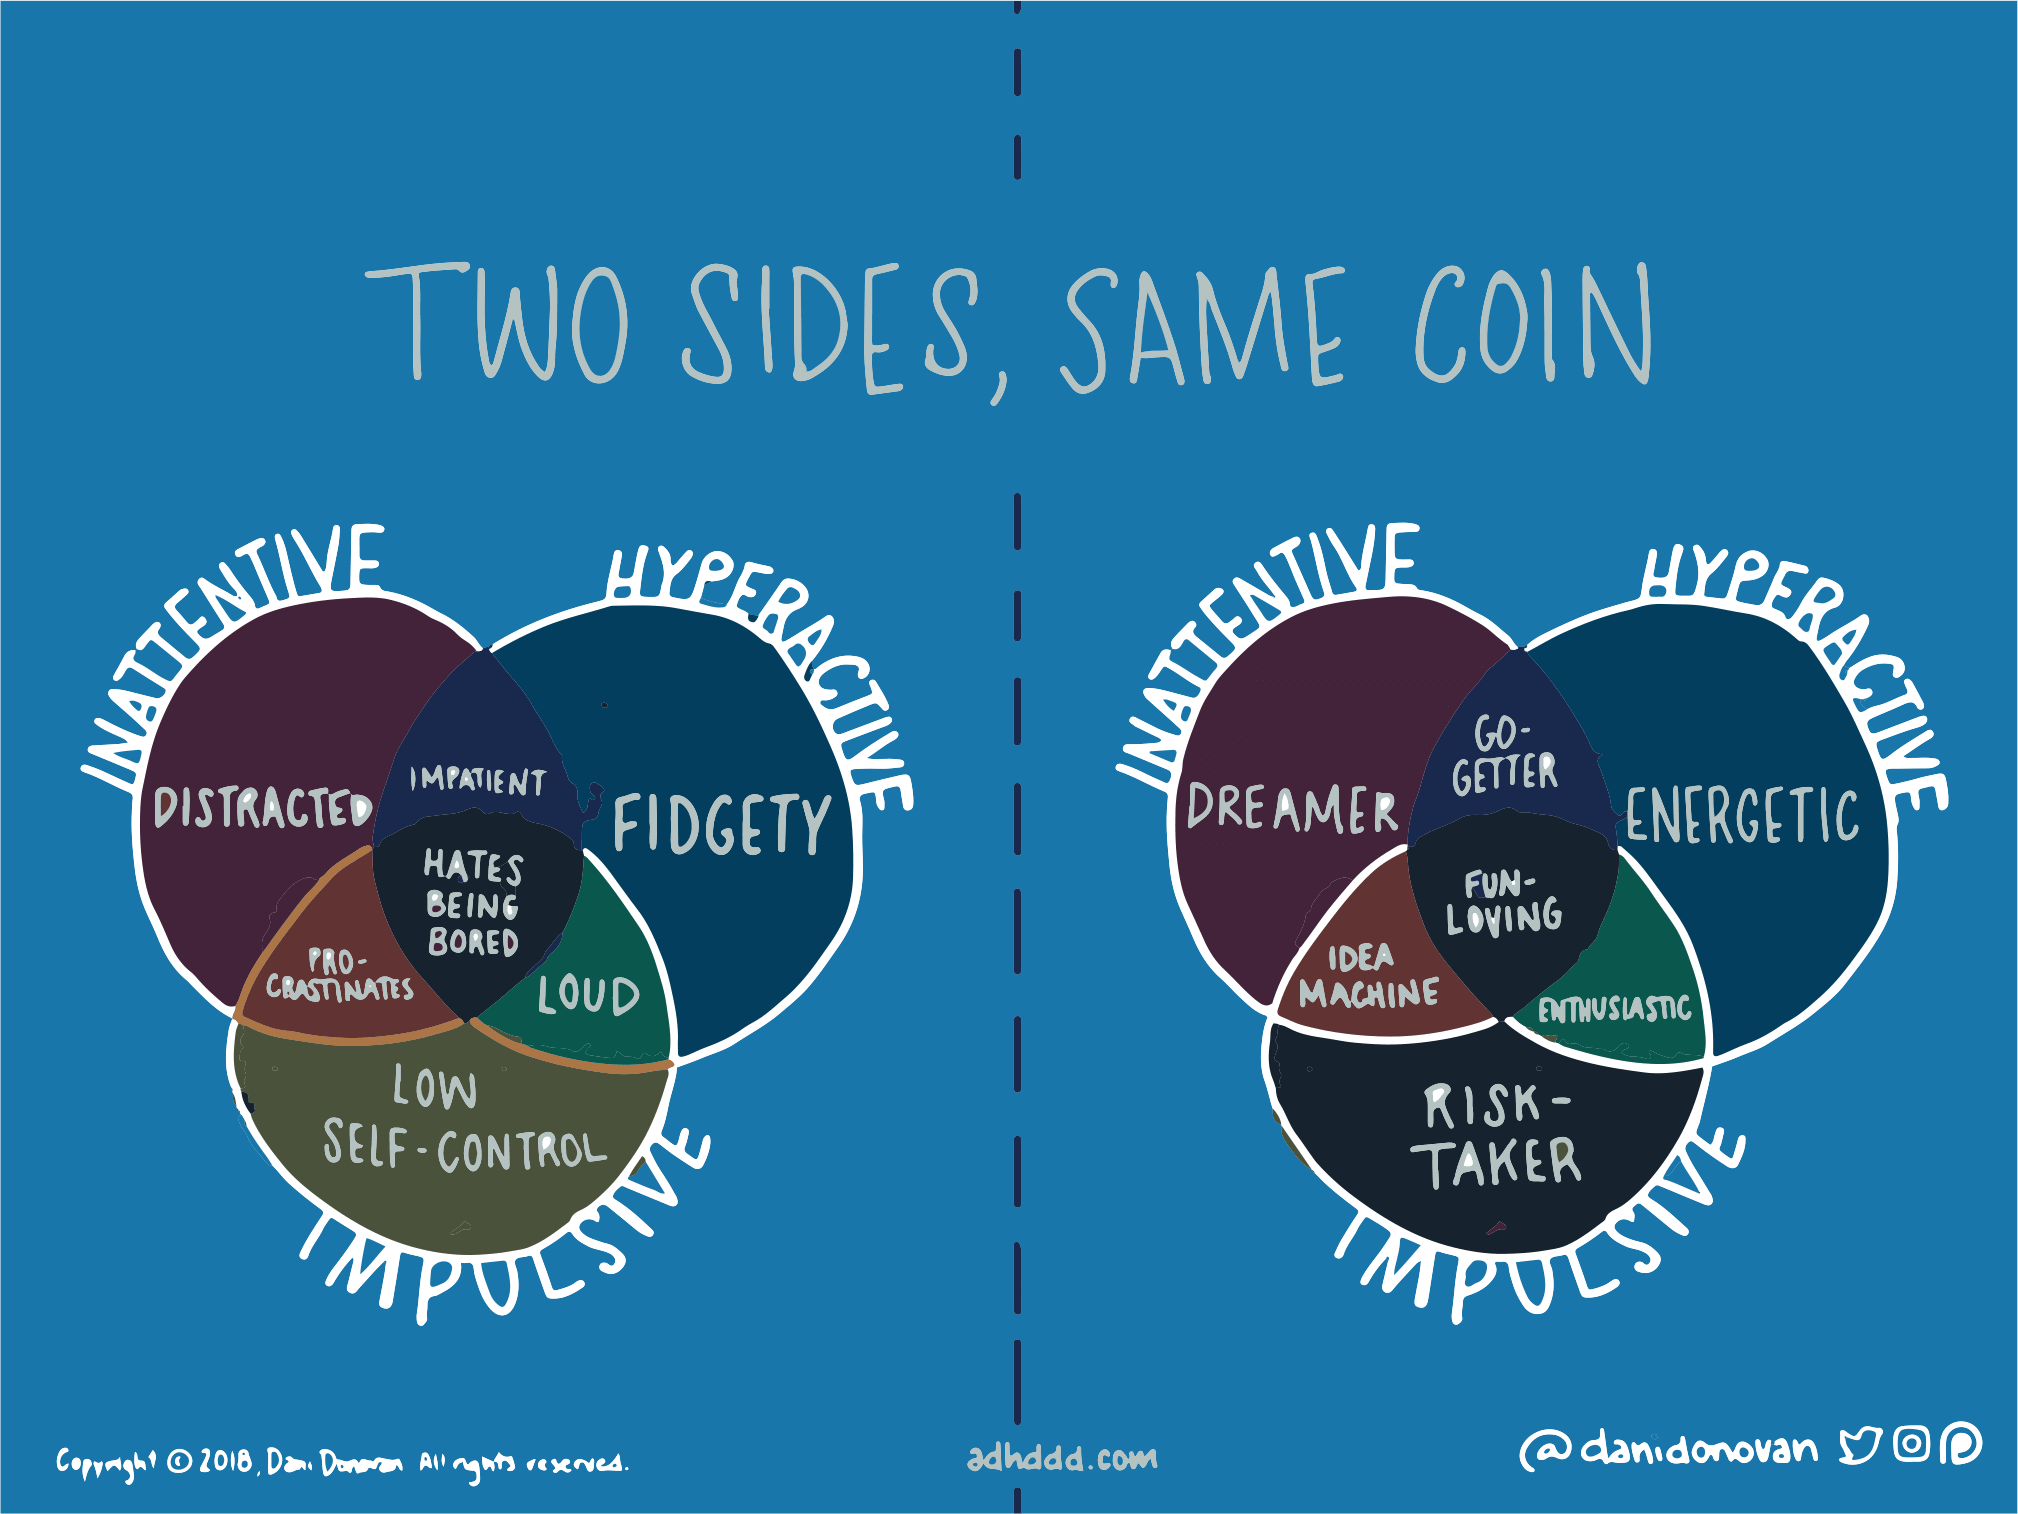 Two sides of the same coin